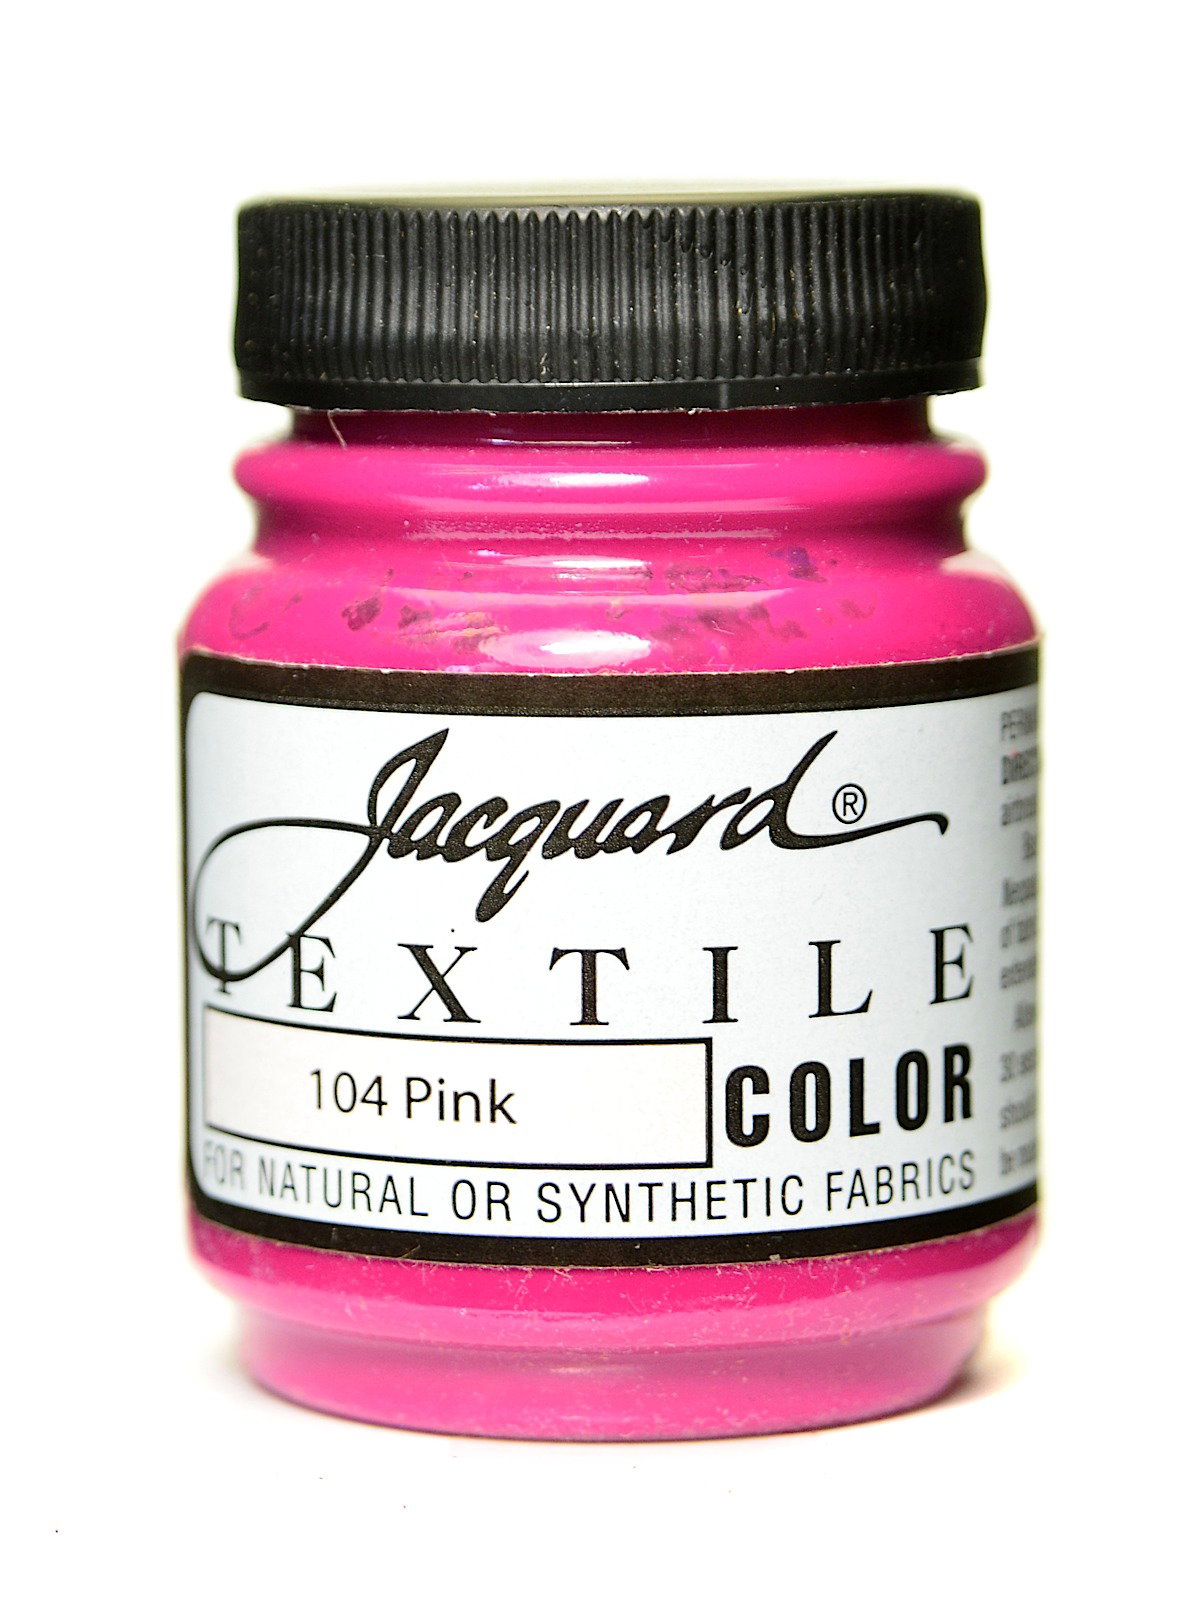 Jacquard Fabric Paint for Clothes - 8 Oz Textile Color - Periwinkle -  Leaves Fabric Soft - Permanent and Colorfast - Professional Quality Paints  Made